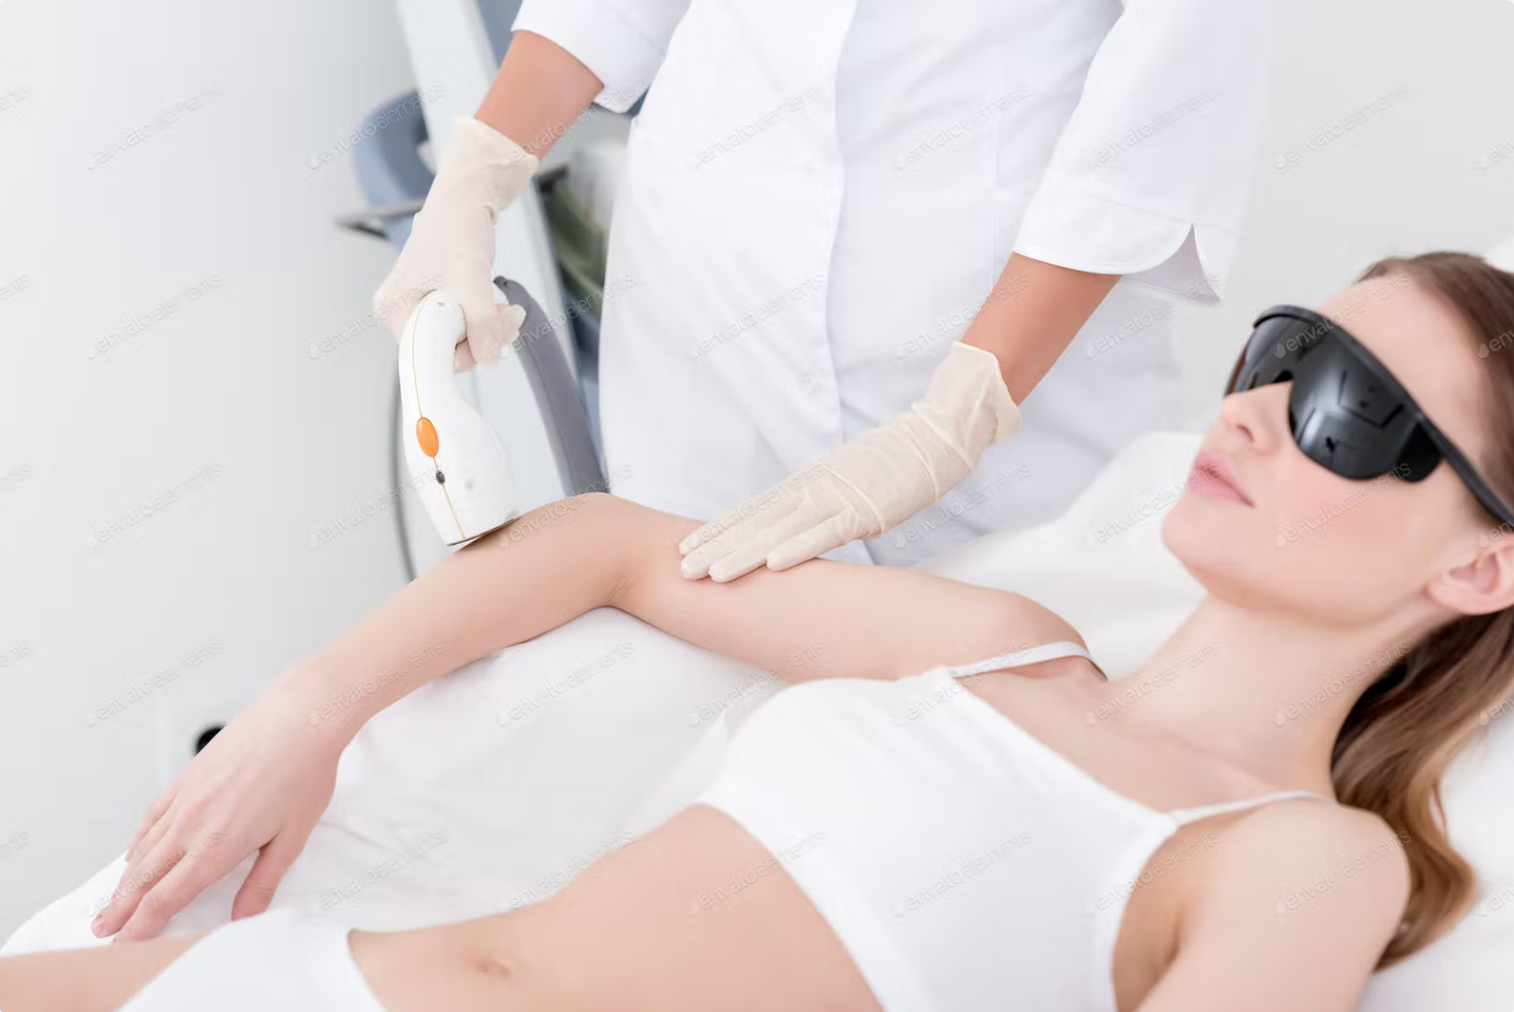 Laser Hair Removal for Arms